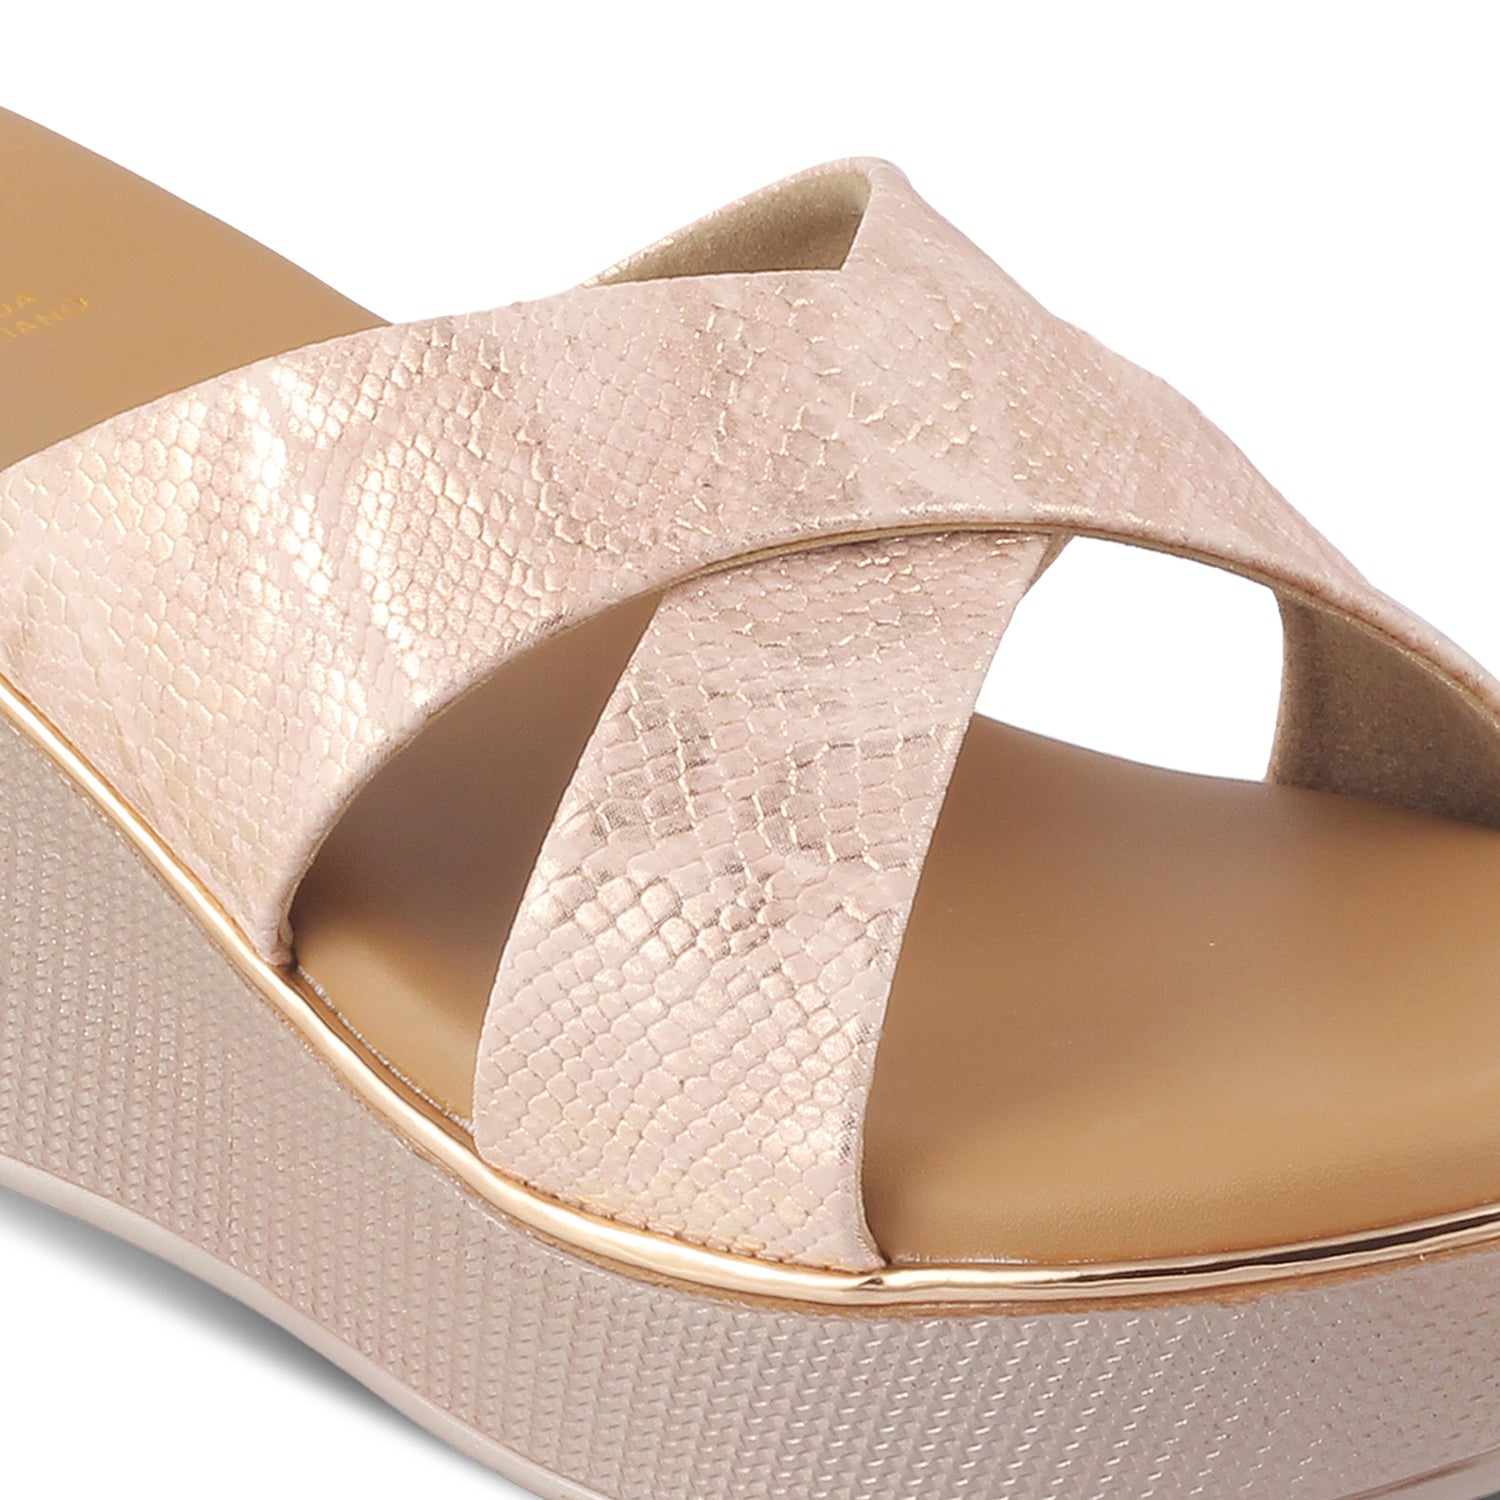 Tresmode-The Savvy Champagne Women's Dress Wedge Sandals Tresmode-Tresmode